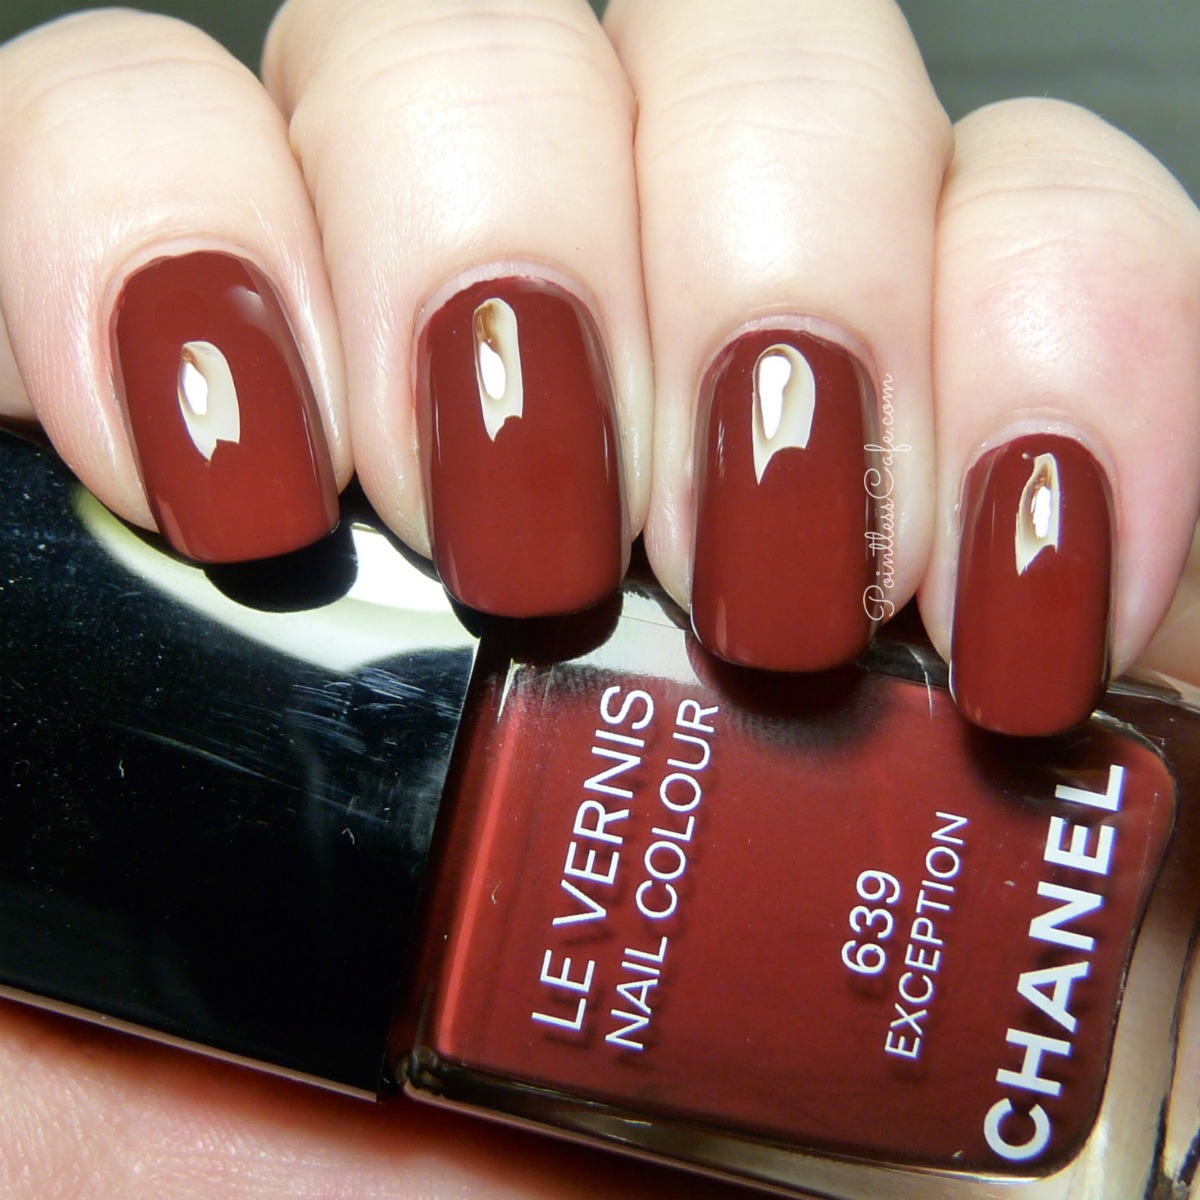 Chanel Exception: Swatches and Review - More Marsala!, Pointless Cafe